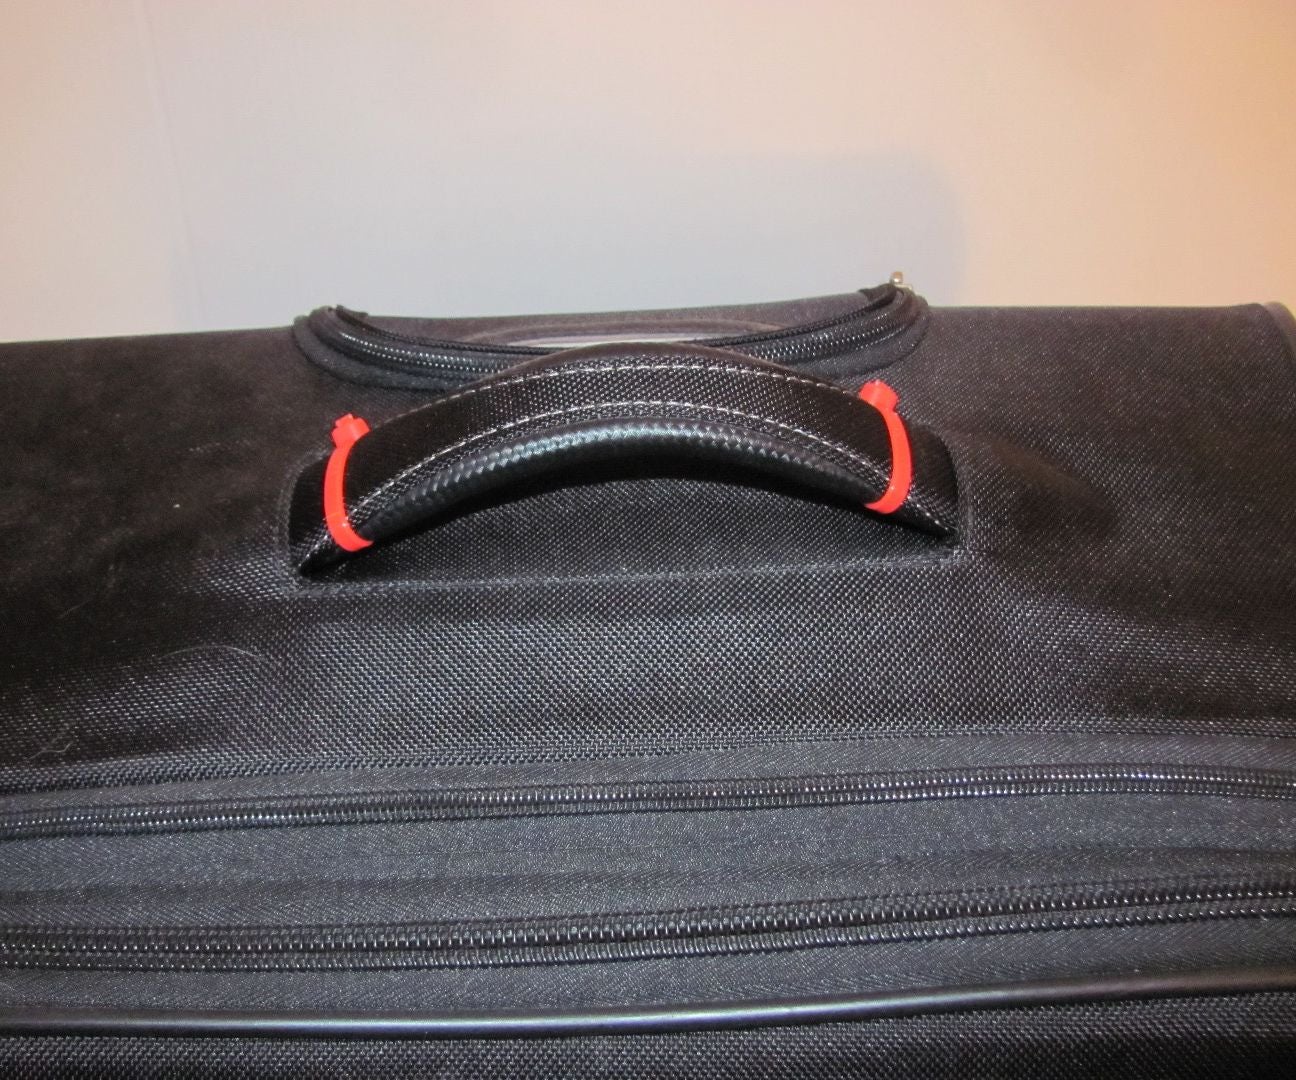 Use Zip Ties to Identify Luggage